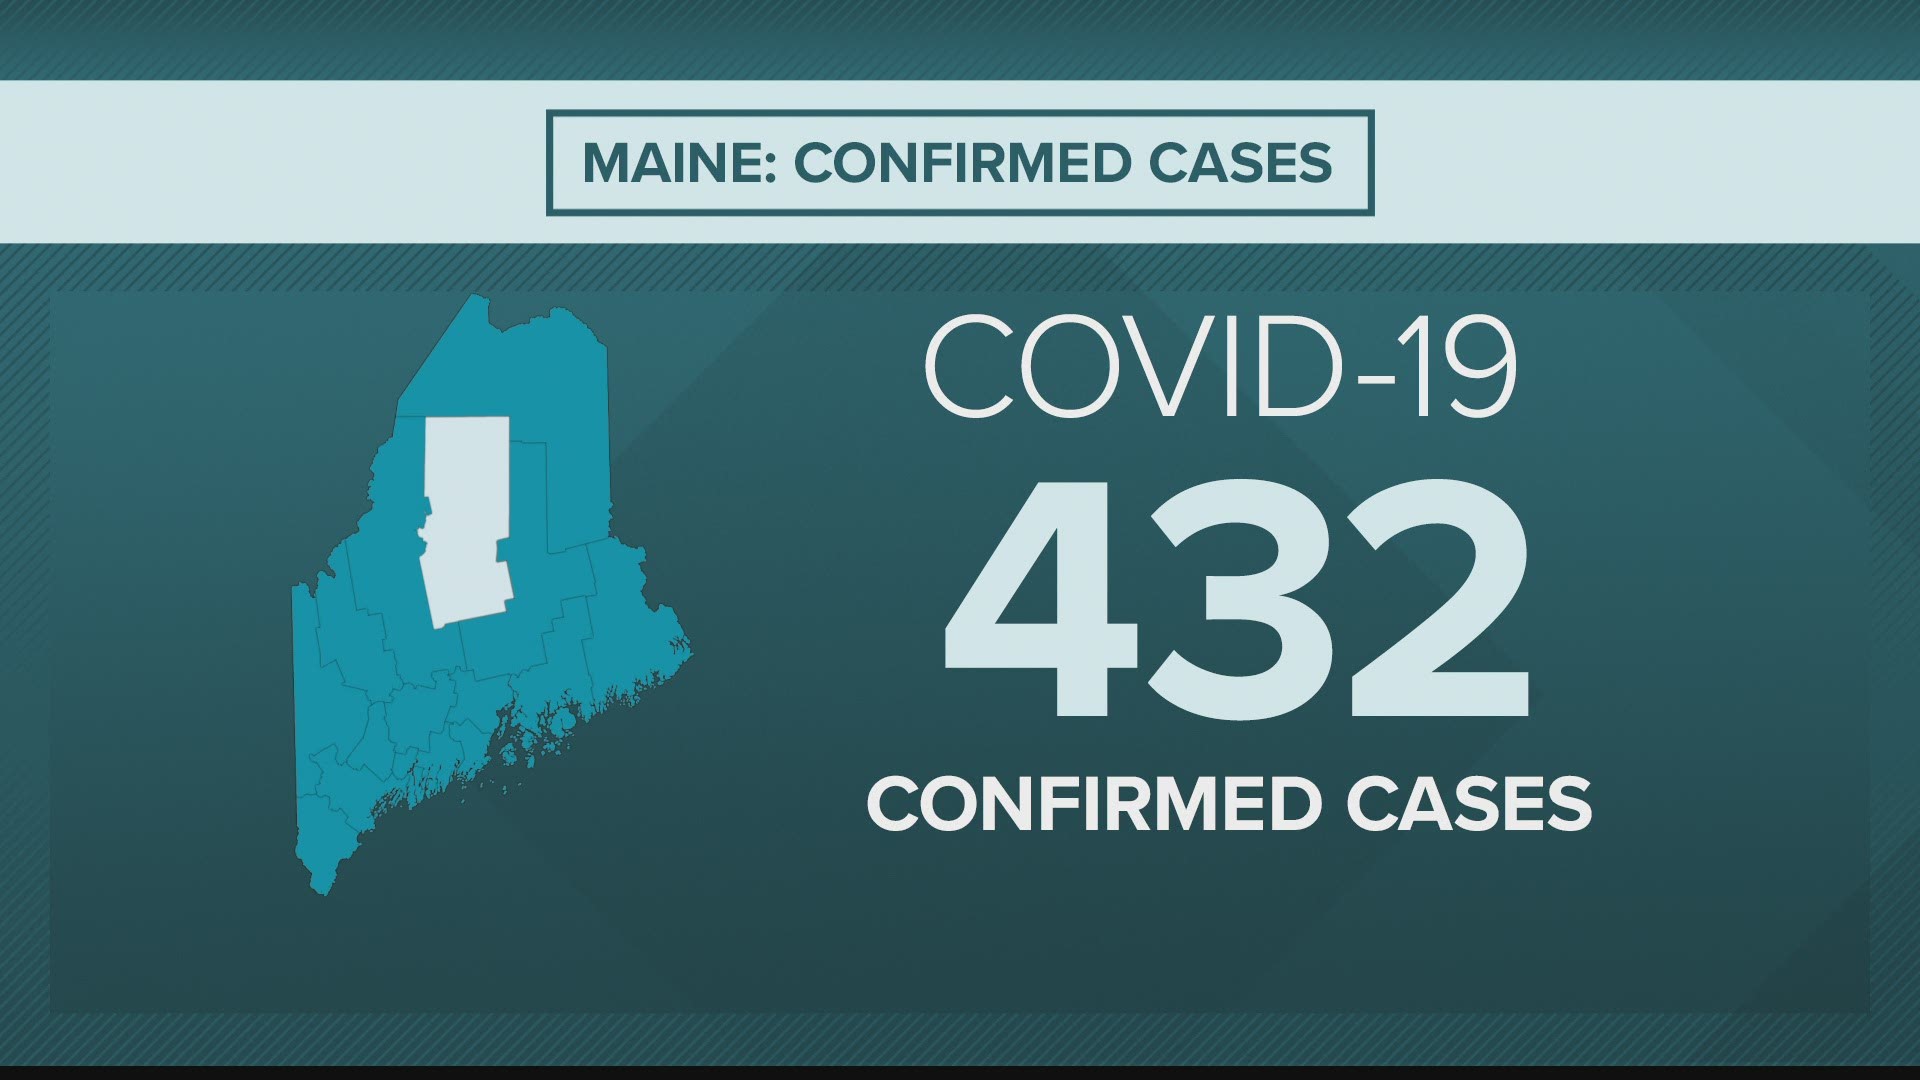 Maine CDC Director Nirav Shah says they are seeing data to indicate Mainers are adhering to 'Stay Healthy at Home' during the coronavirus, COVID-19 outbreak